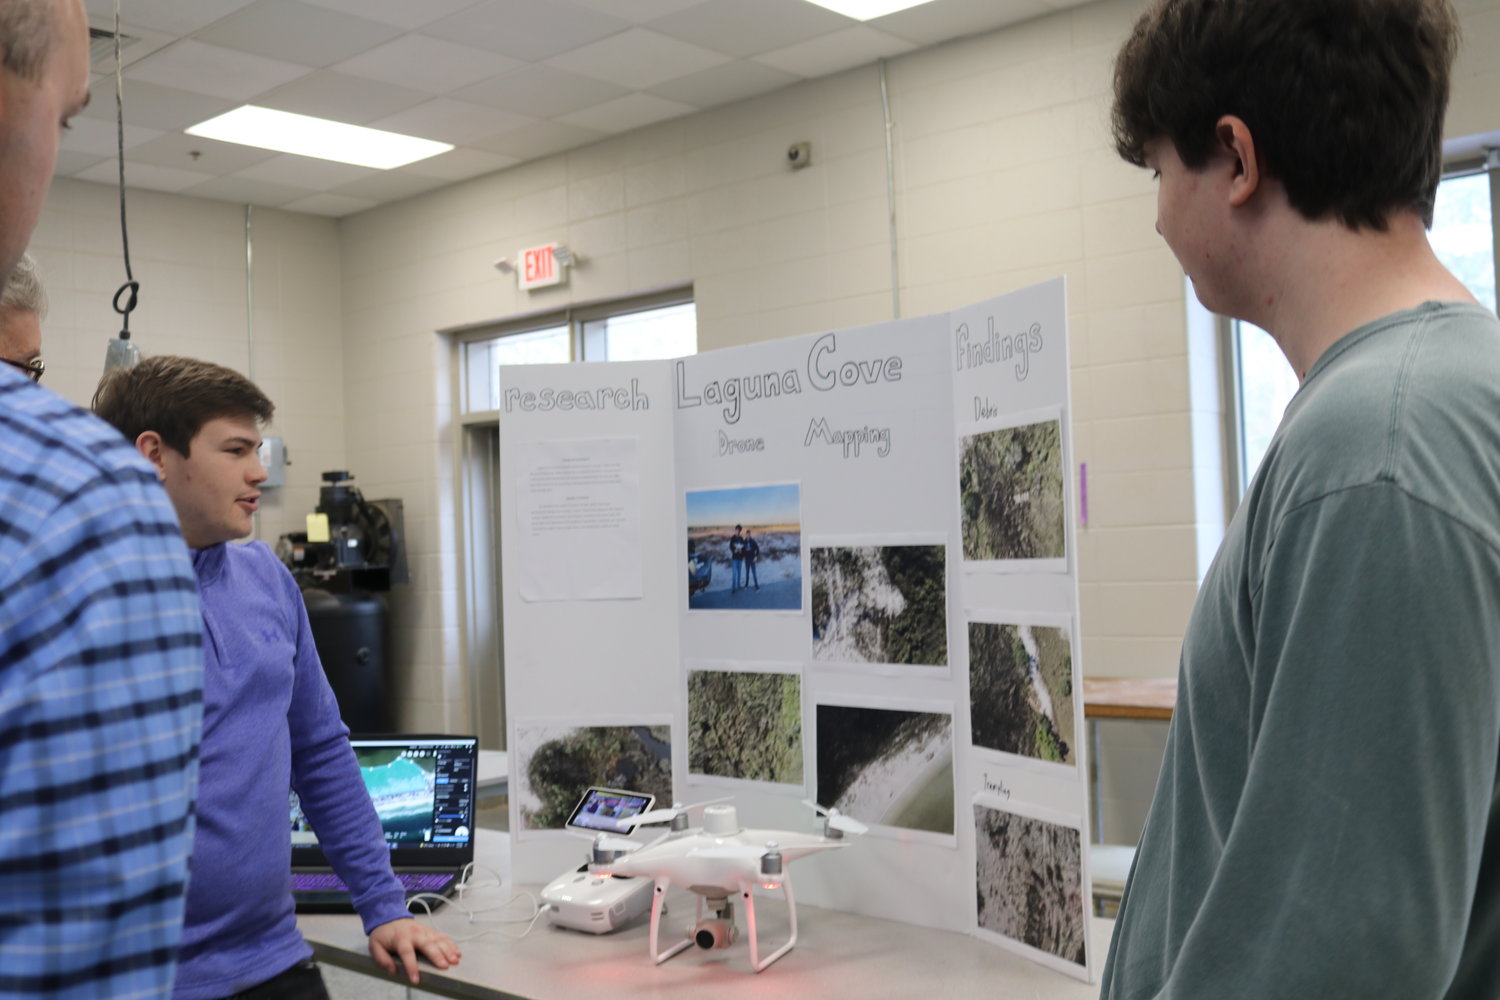 Austin Sparks and Mason Reffitt joined forces on a Capstone Project over drone mapping Laguna Cove shoreline. The students had their research, findings and technology displayed and were ready to answer questions from attendees.